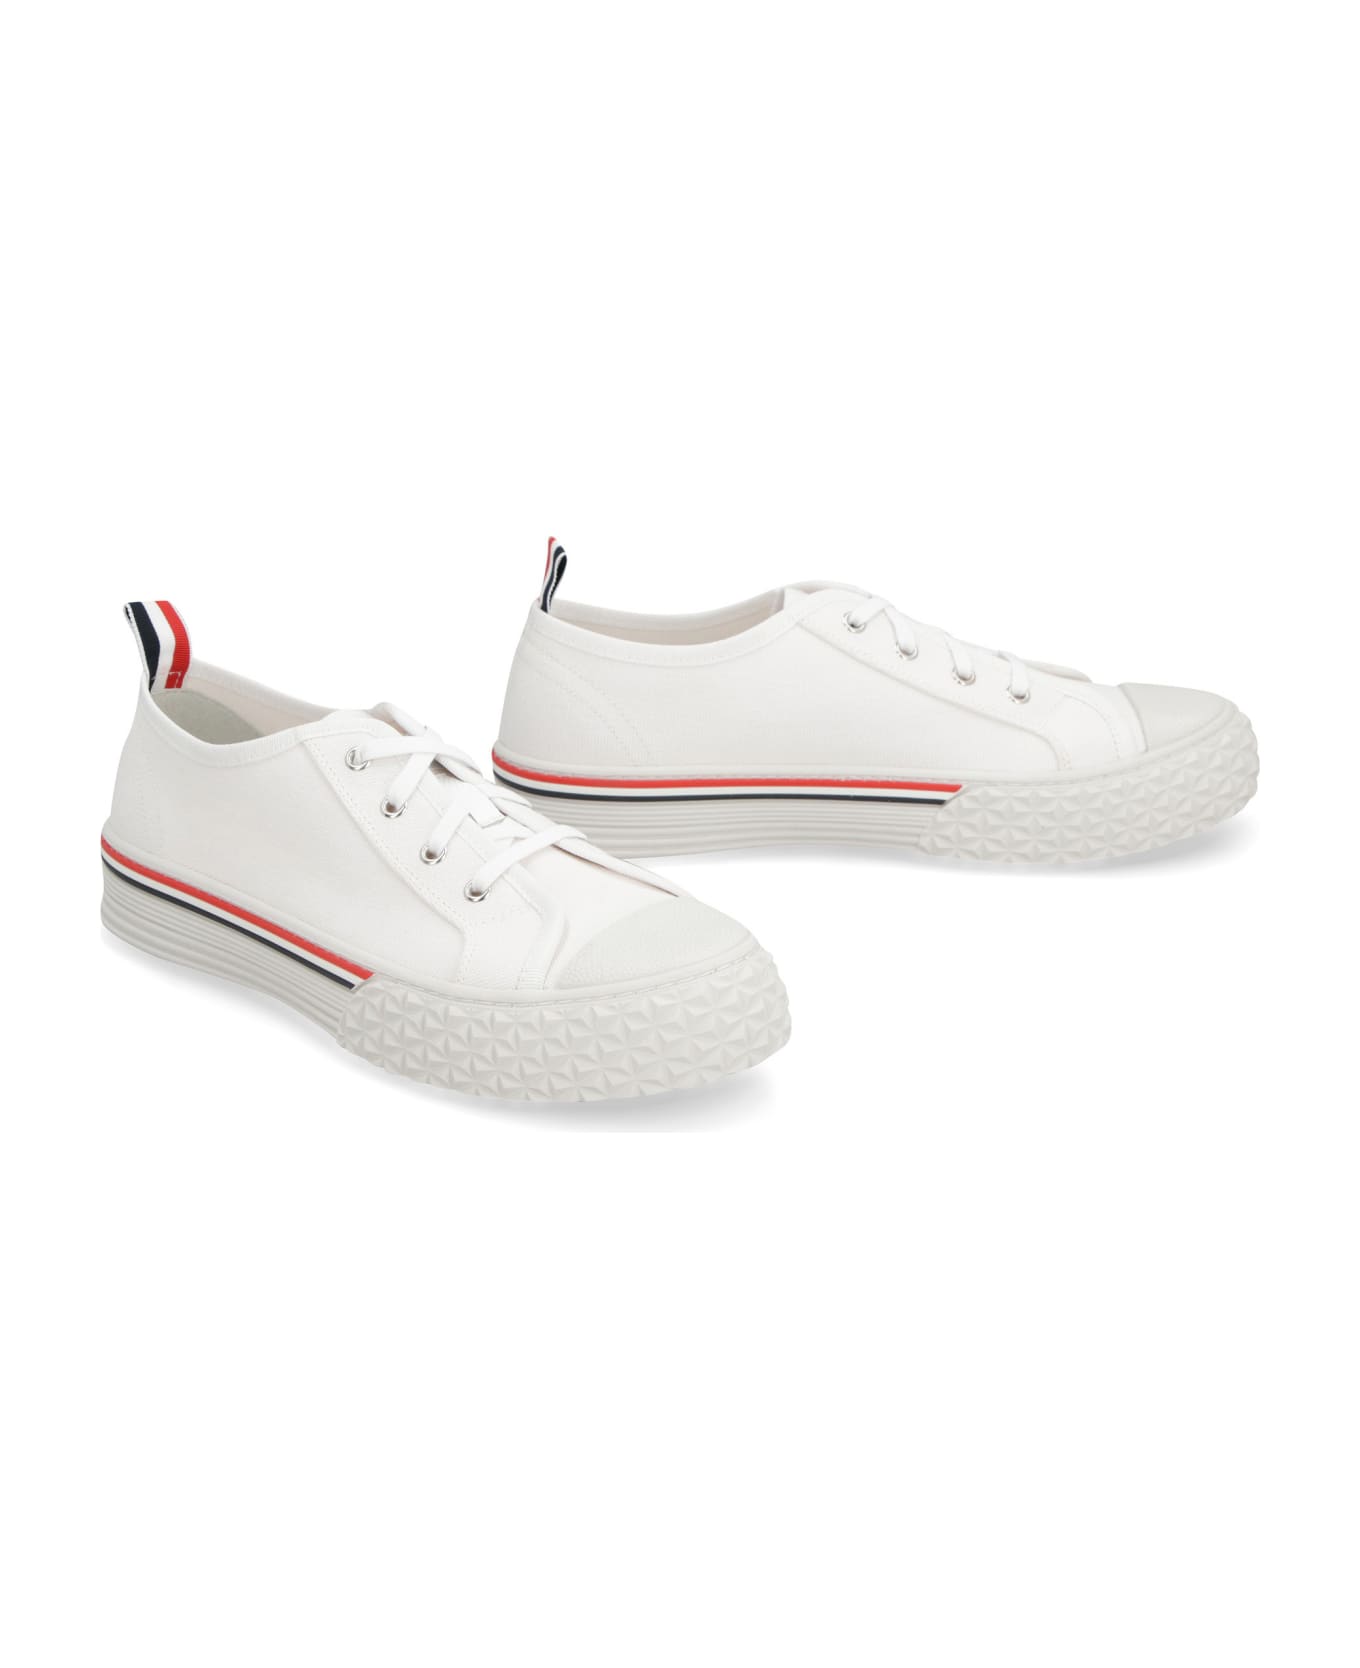 Thom Browne Collegiate Canvas Low-top Sneakers - White スニーカー